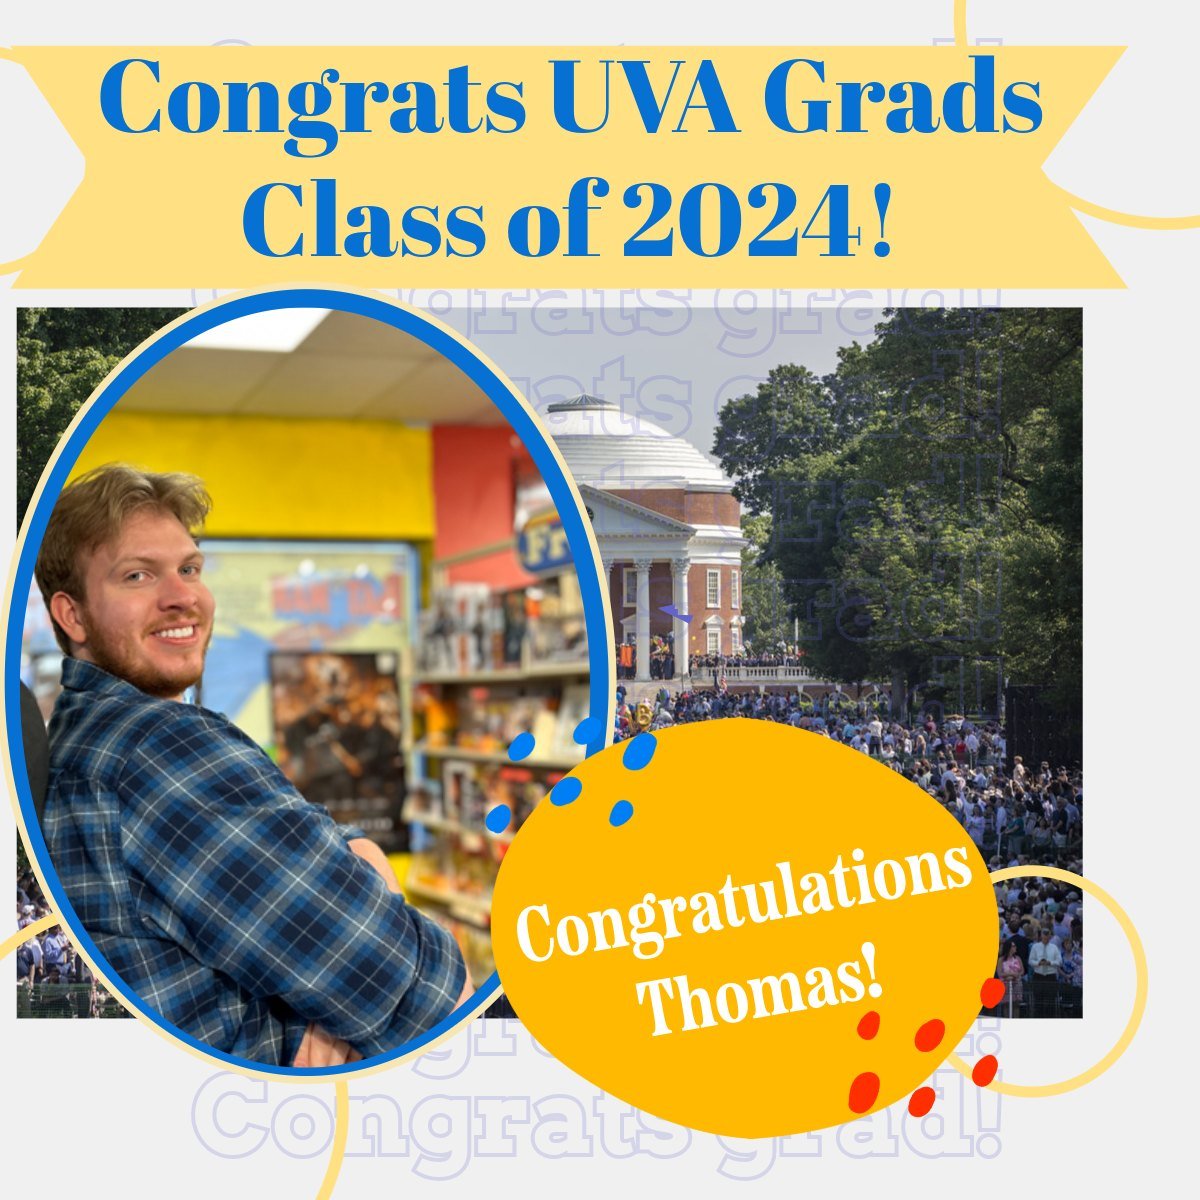 Thomas is graduating today!! We are all proud of you, dude! #uvaclassof2024